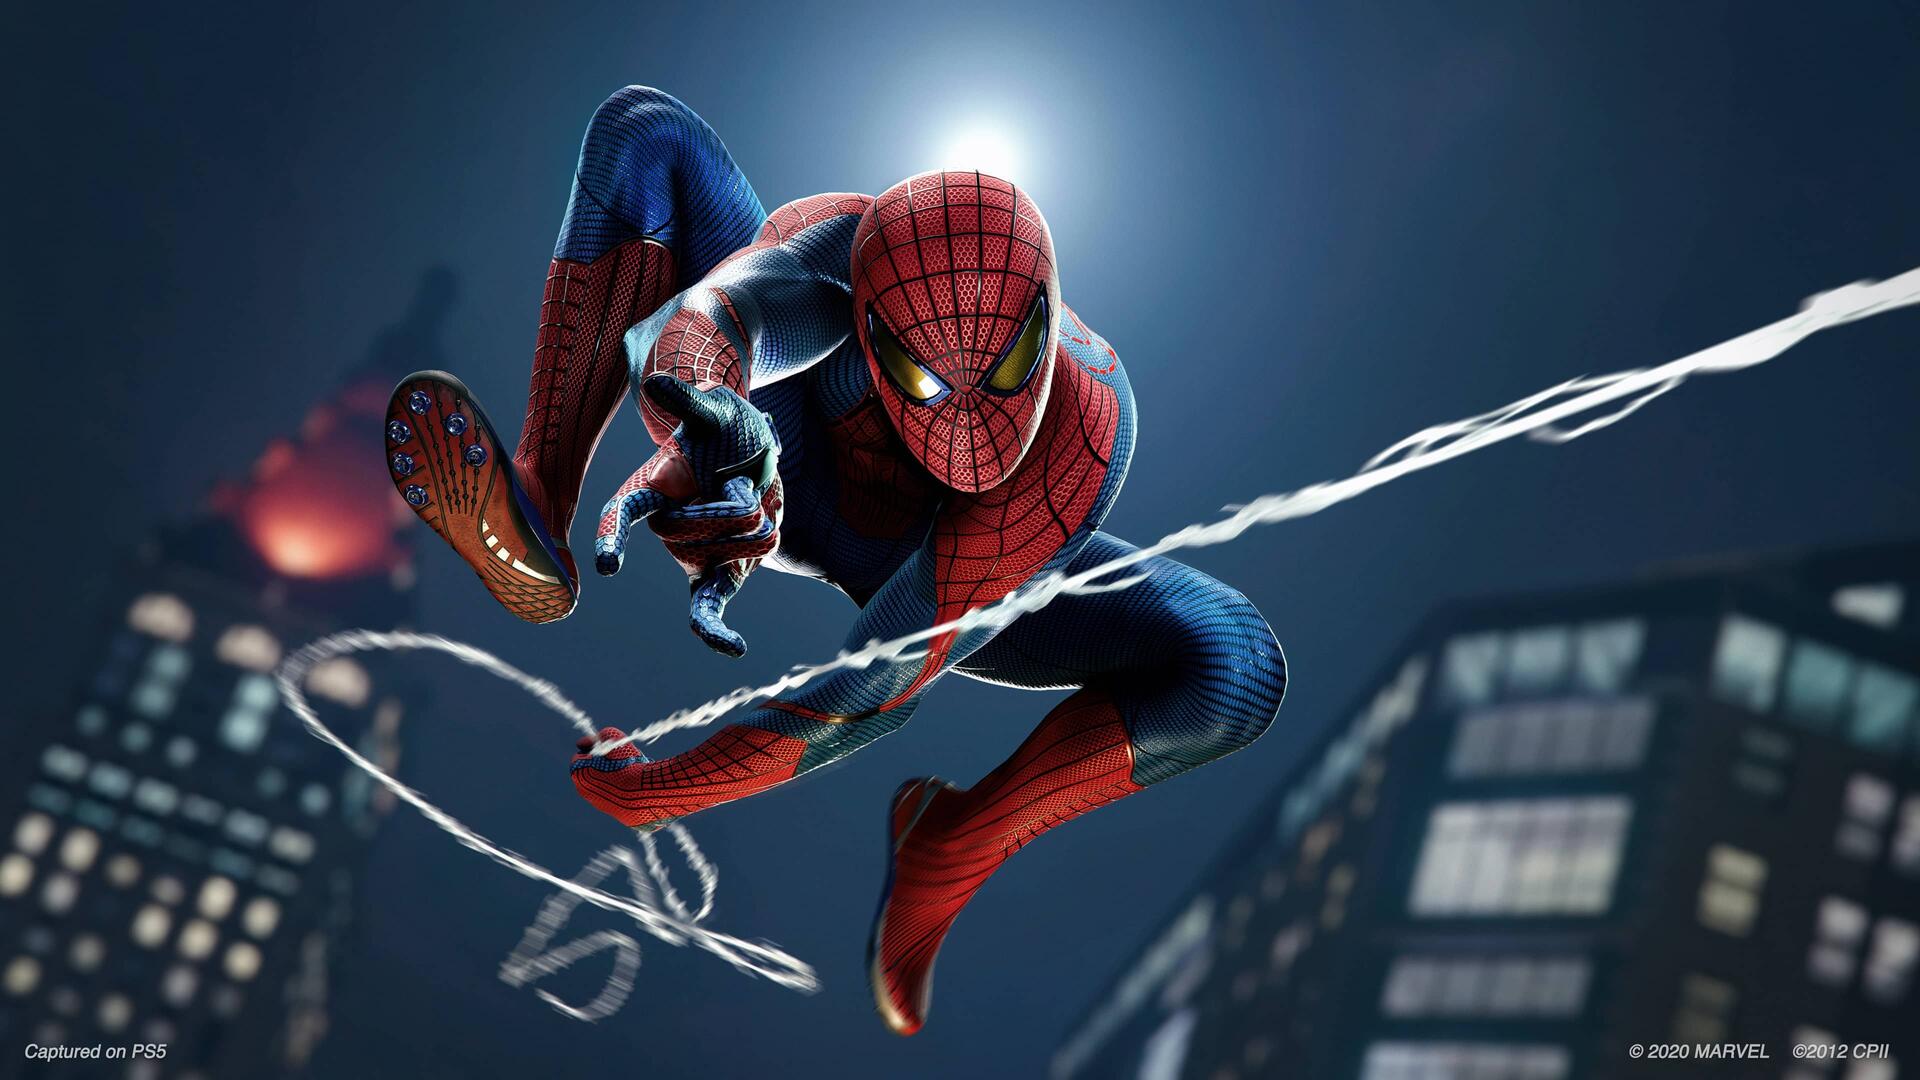 Marvel's Spider-Man 2 Game Review: Insomniac Levels Up With Darker,  Grittier Take on Beloved Heroes